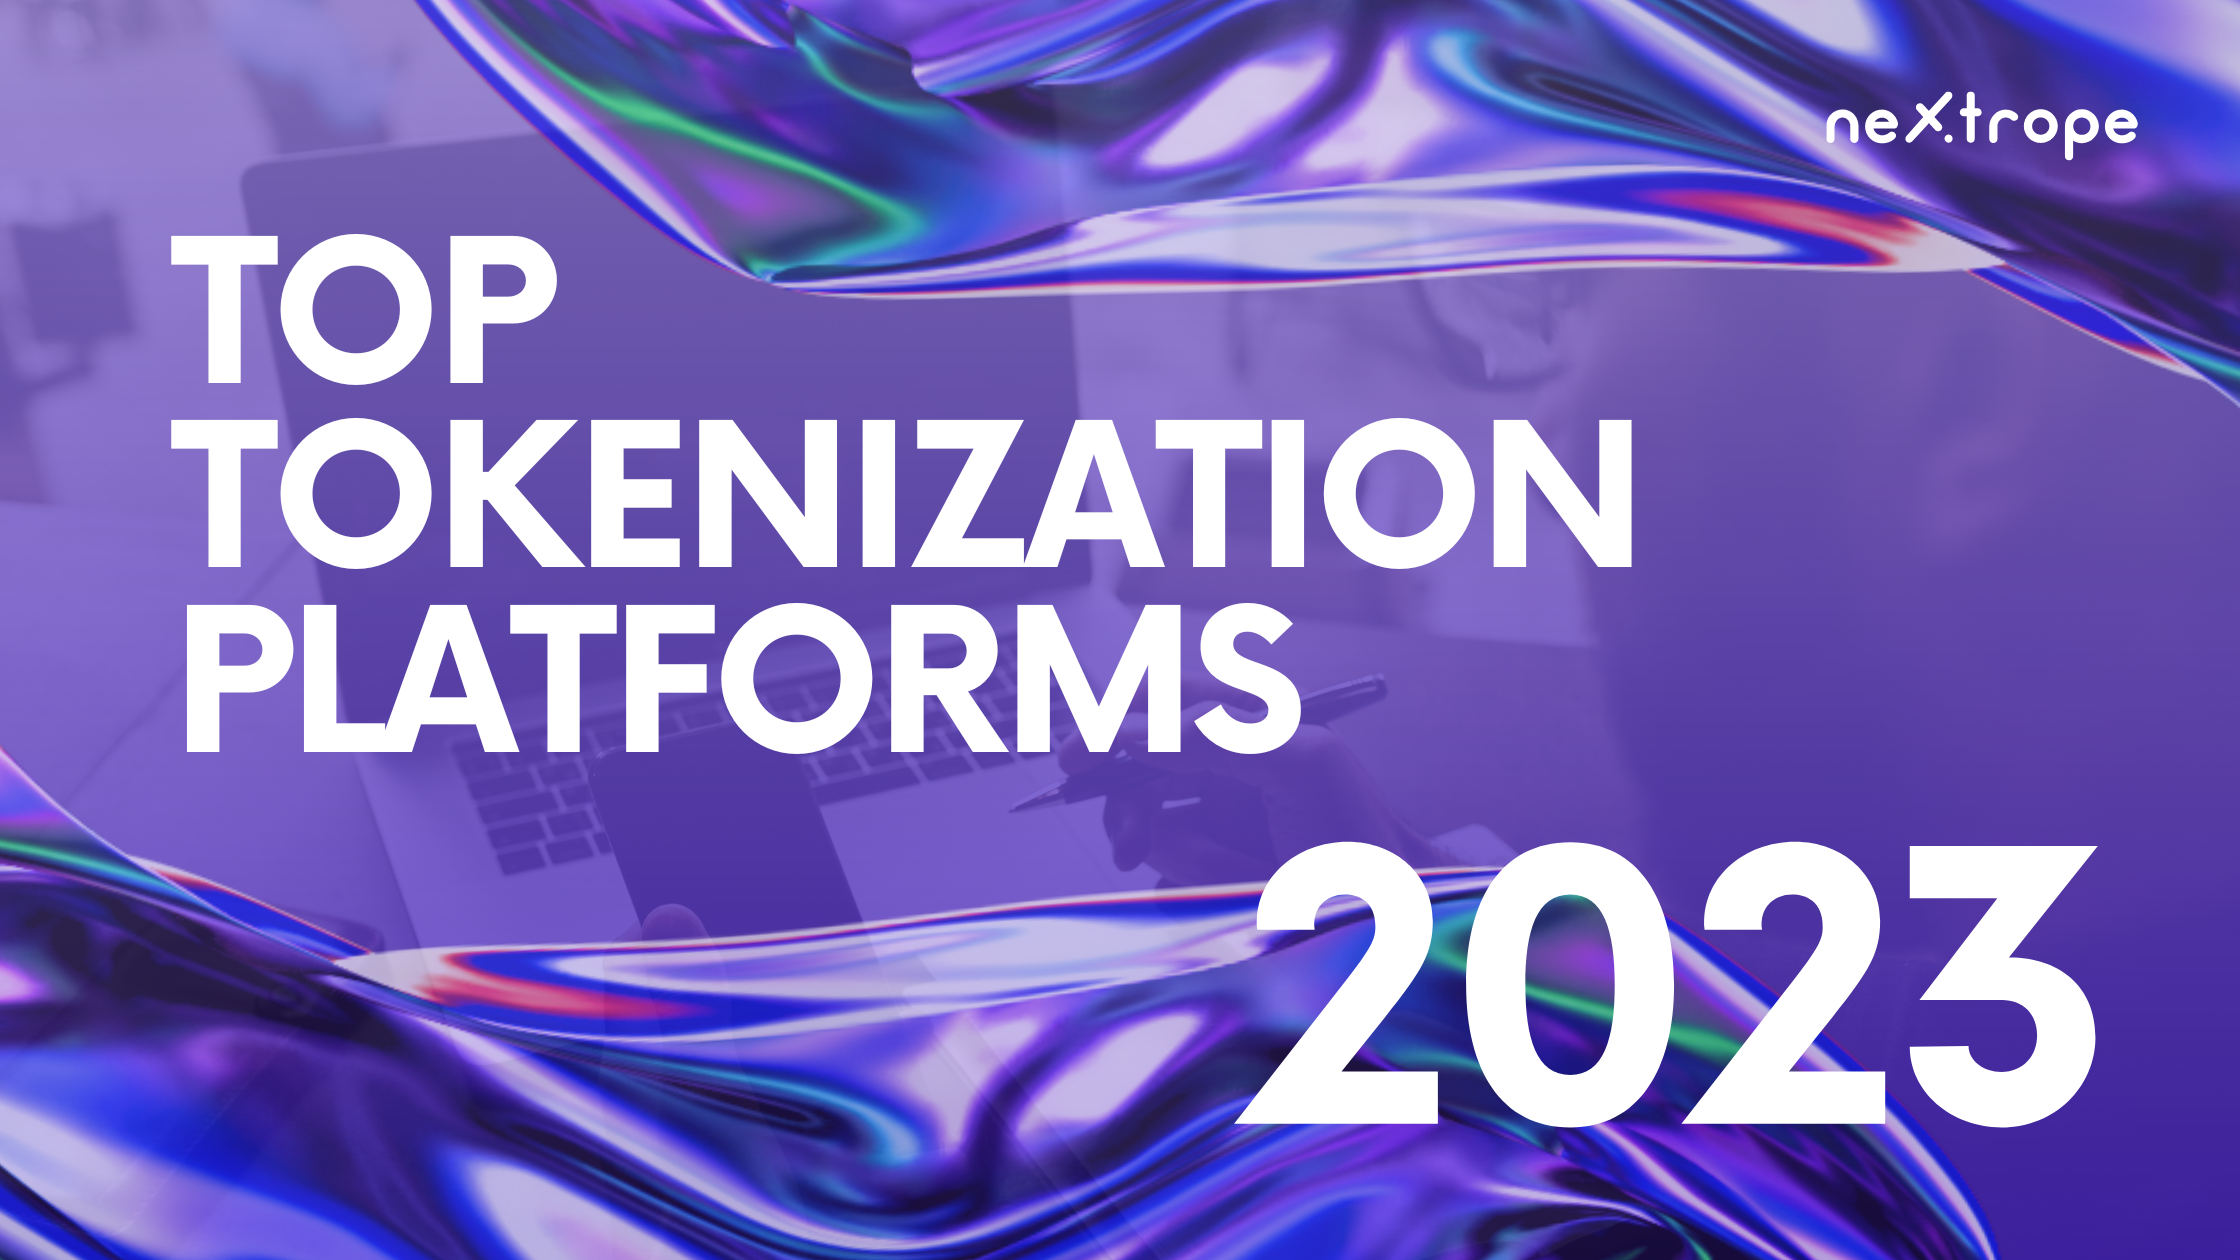 Top Tokenization Platforms in 2023: A Comparative Analysis